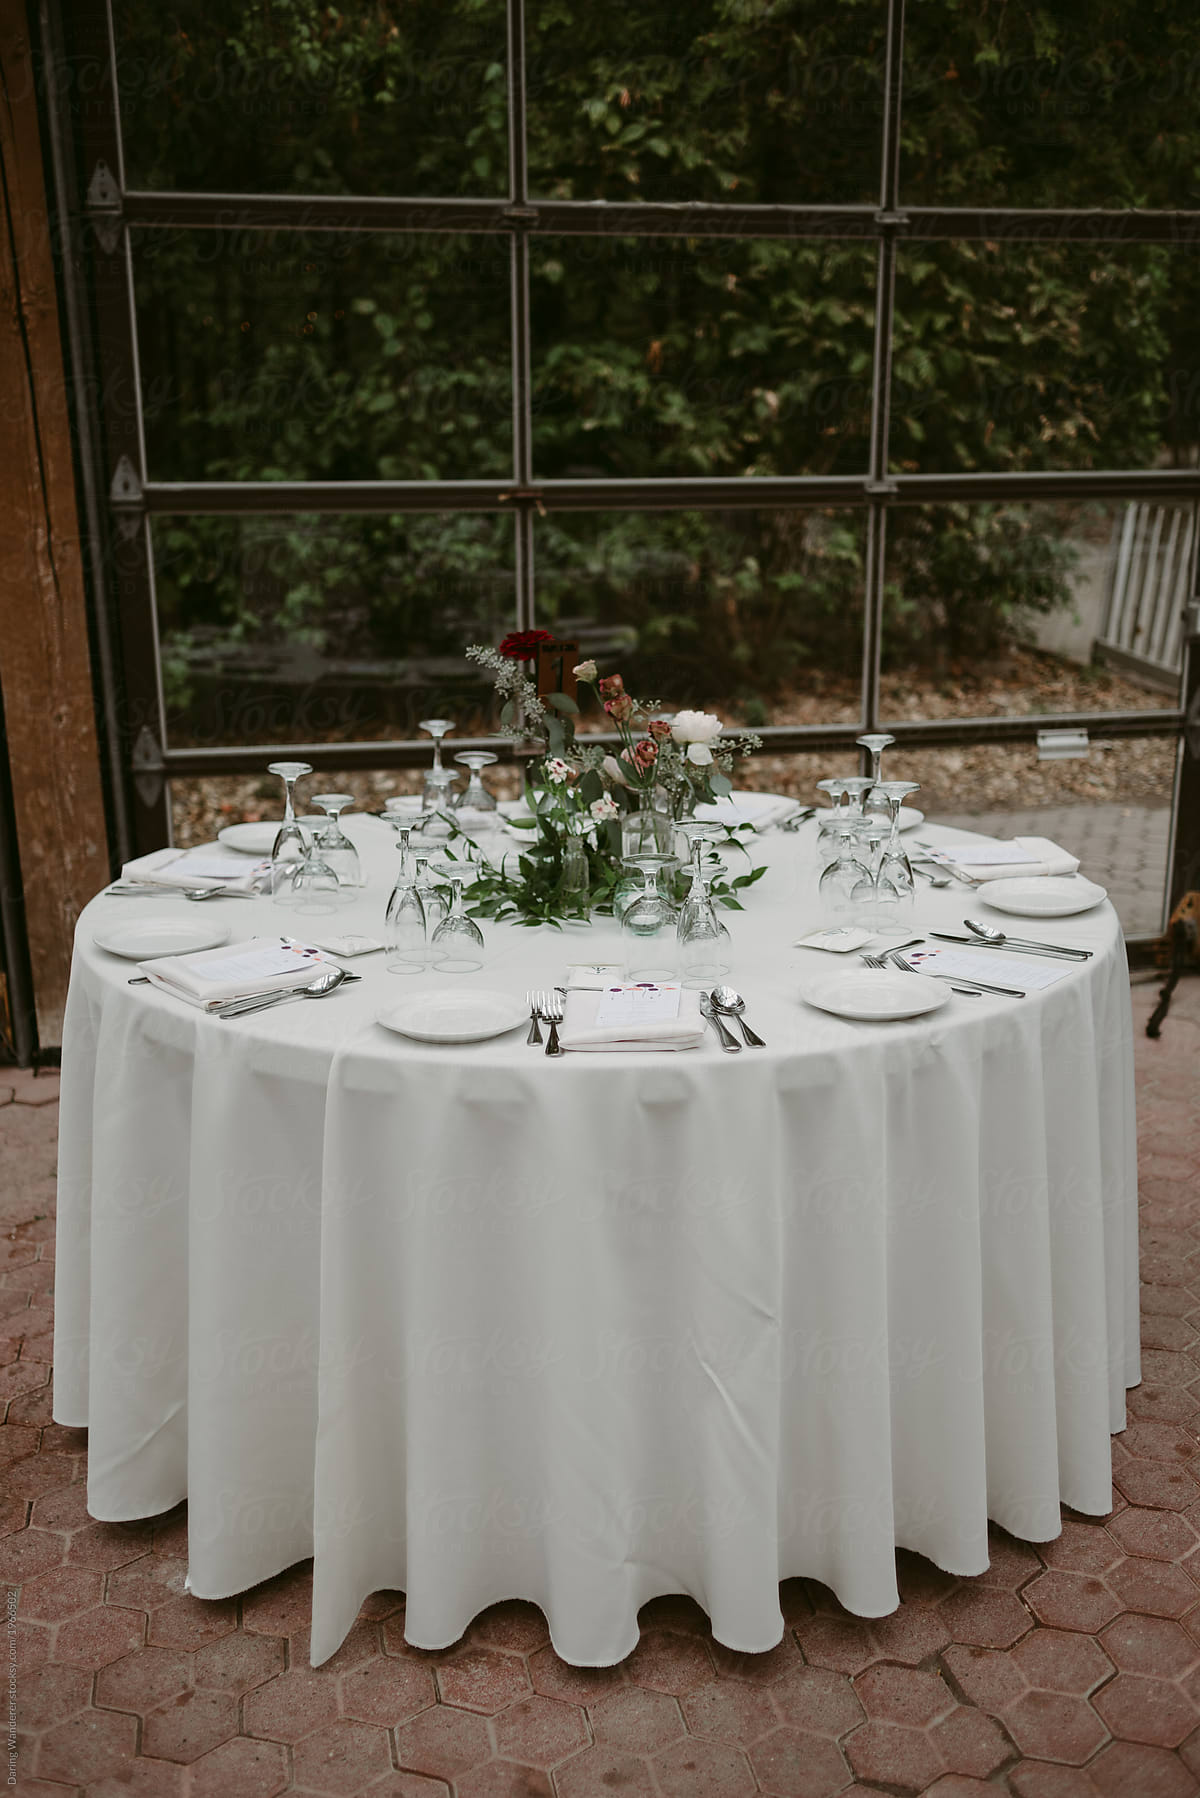 Round Table Set Up For Dinner In Glass Room By Jess Craven